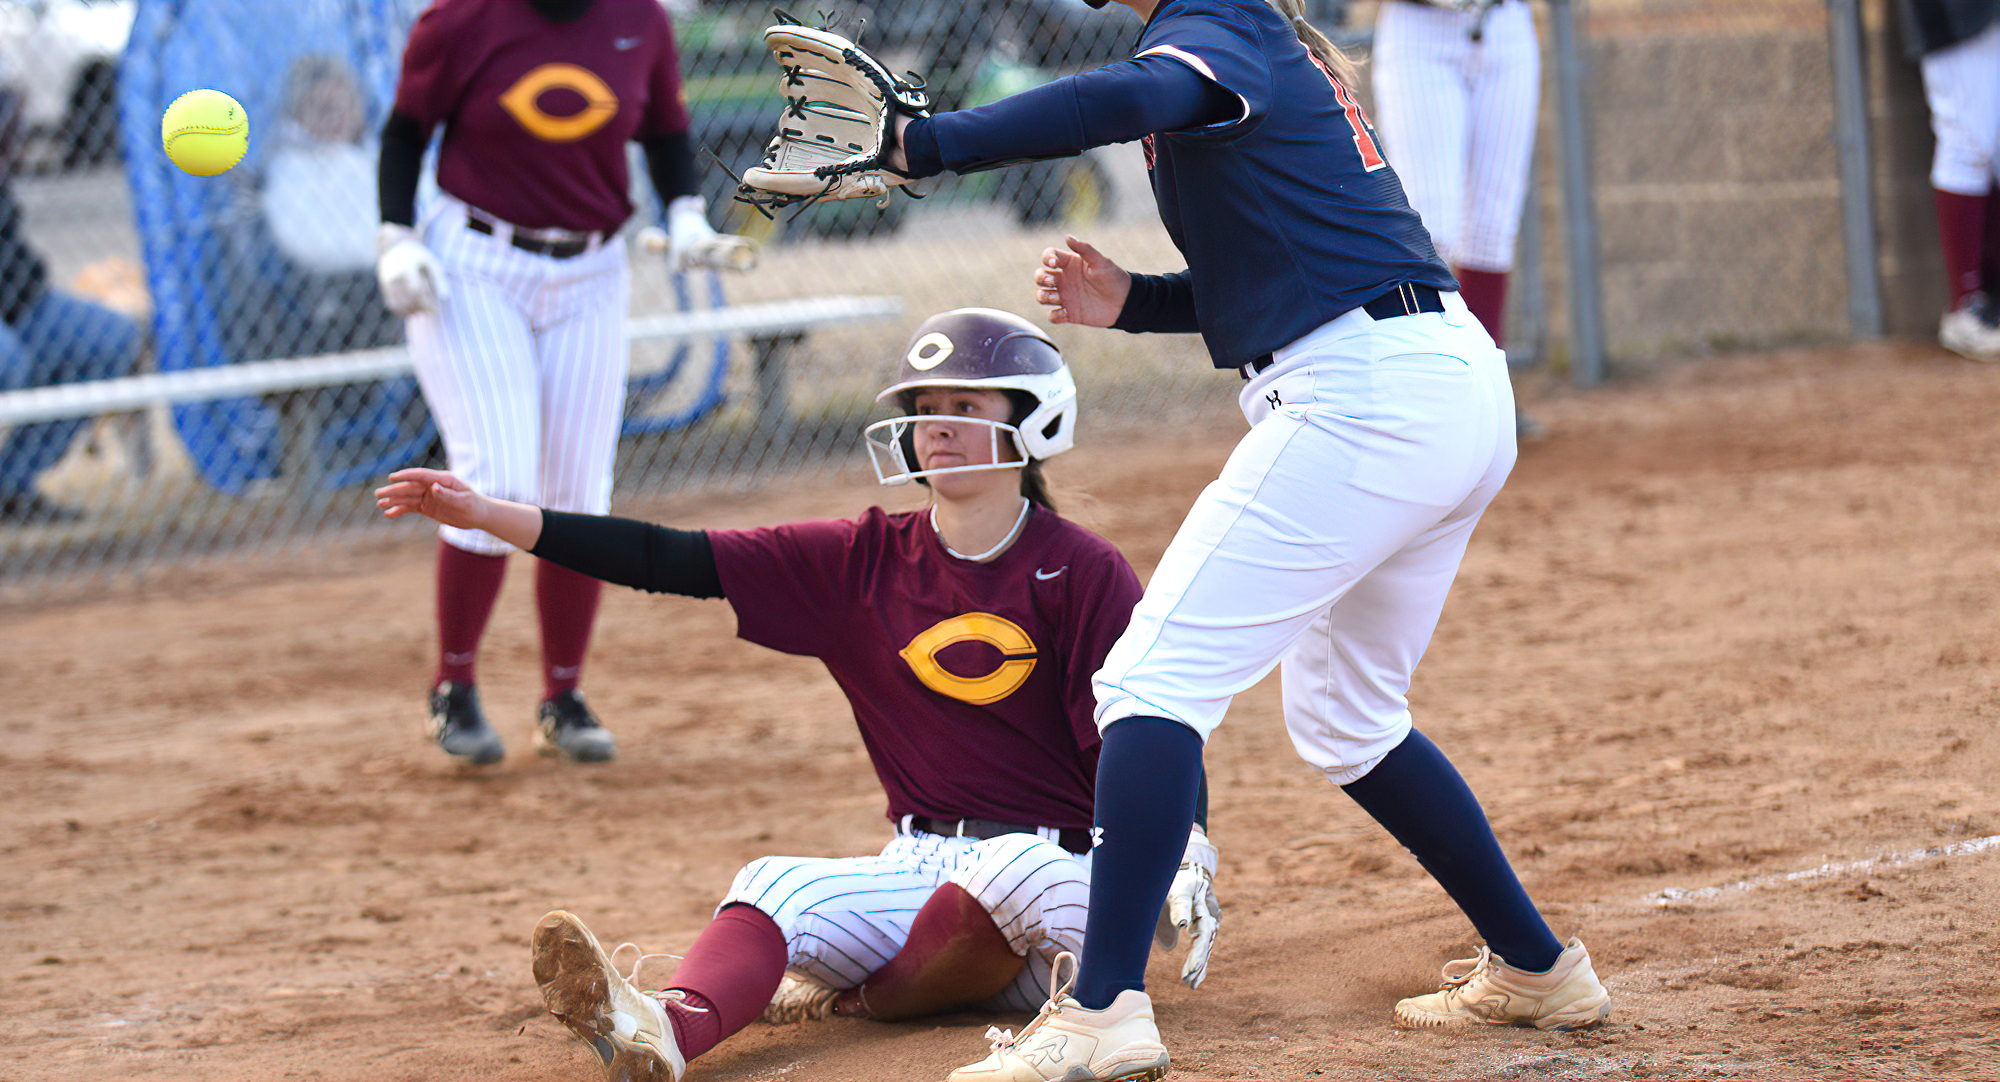 Reese Hauck slides into home after scoring on a wild pitch in the second inning of Game 2 in the Cobbers' doubleheader against Macalester.